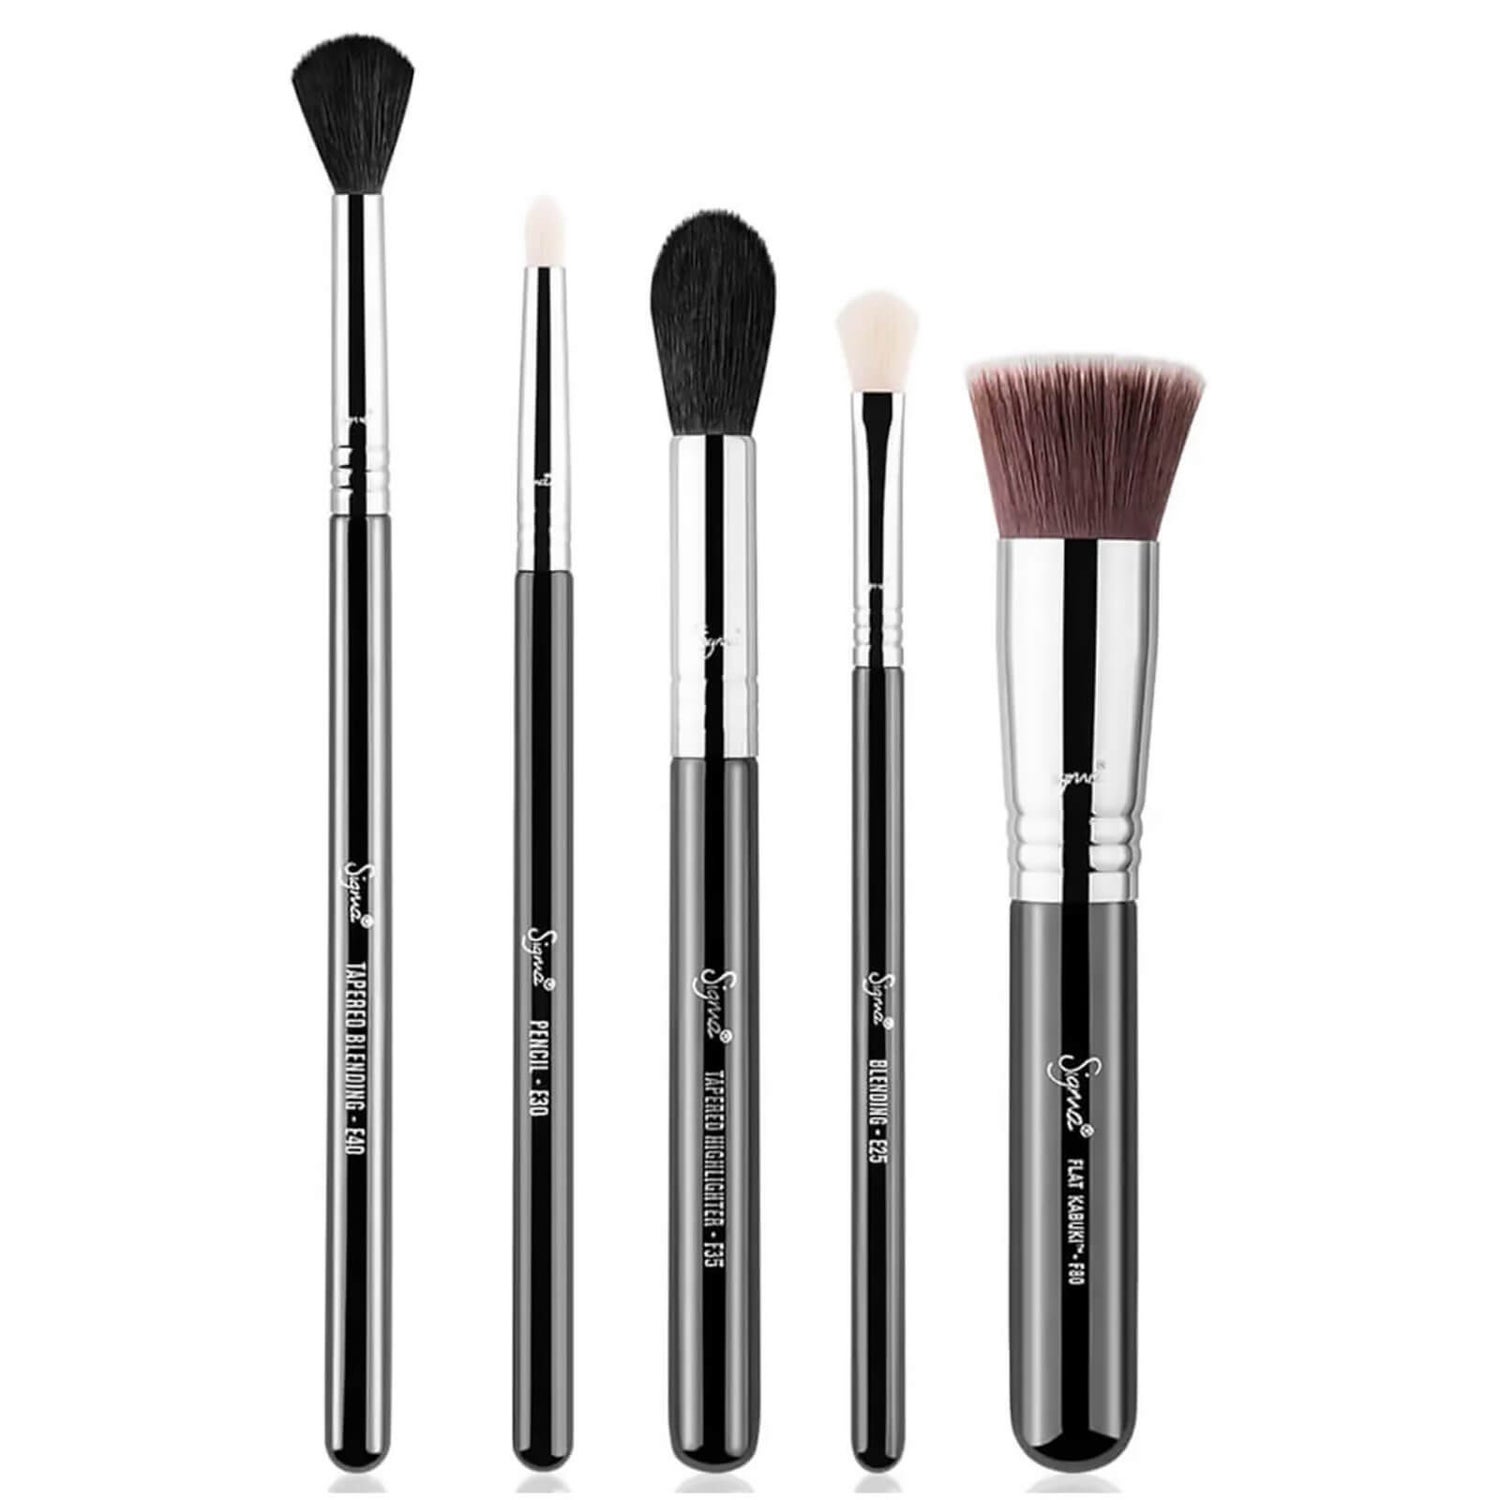 Sigma Most-Wanted Brush Set (5 piece - $92 Value)